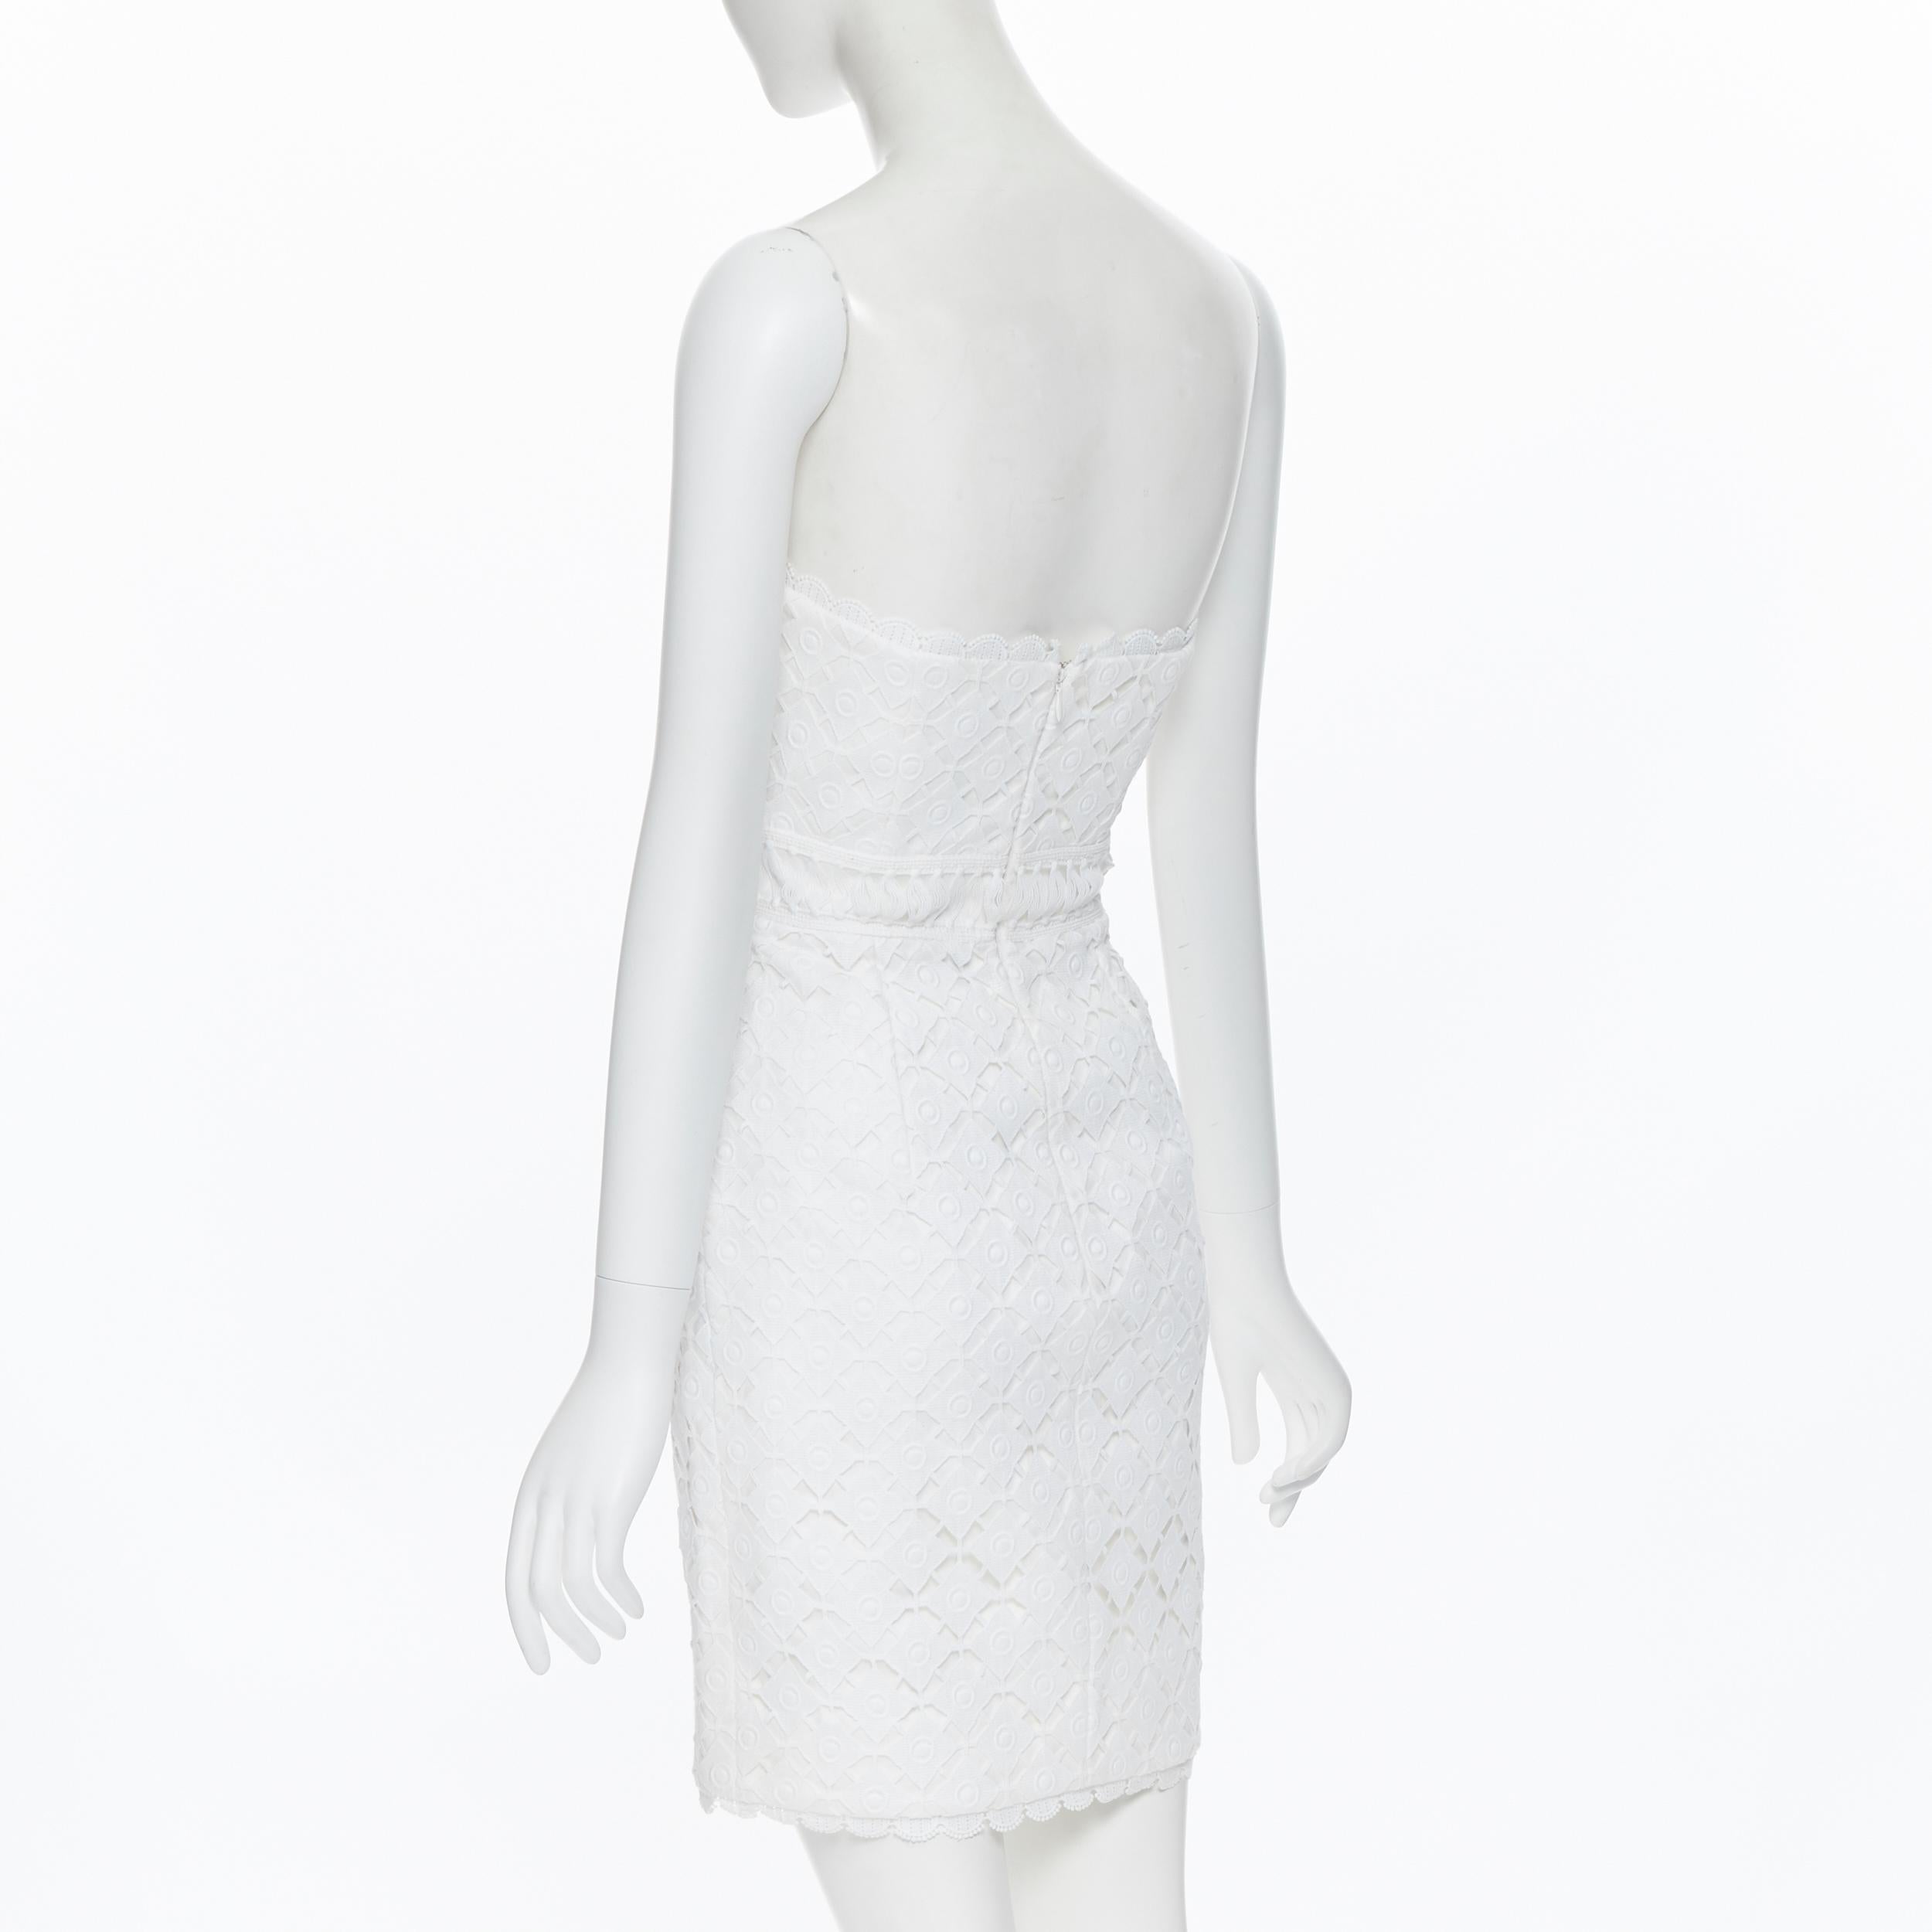 Women's ANDREW GN 2009 white floral lace lattice strapless cocktail dress IT36 XS